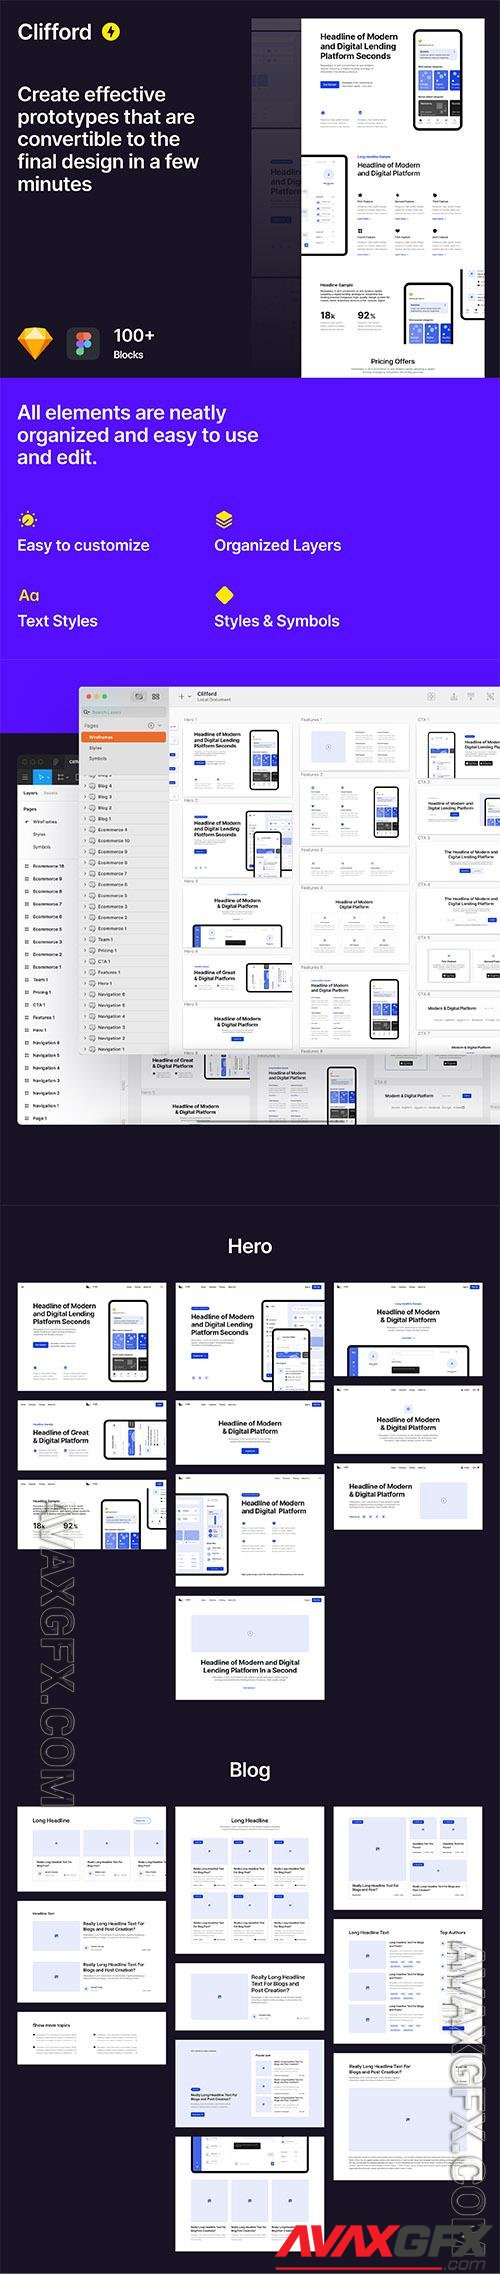 Clifford - Web Wireframe Kit